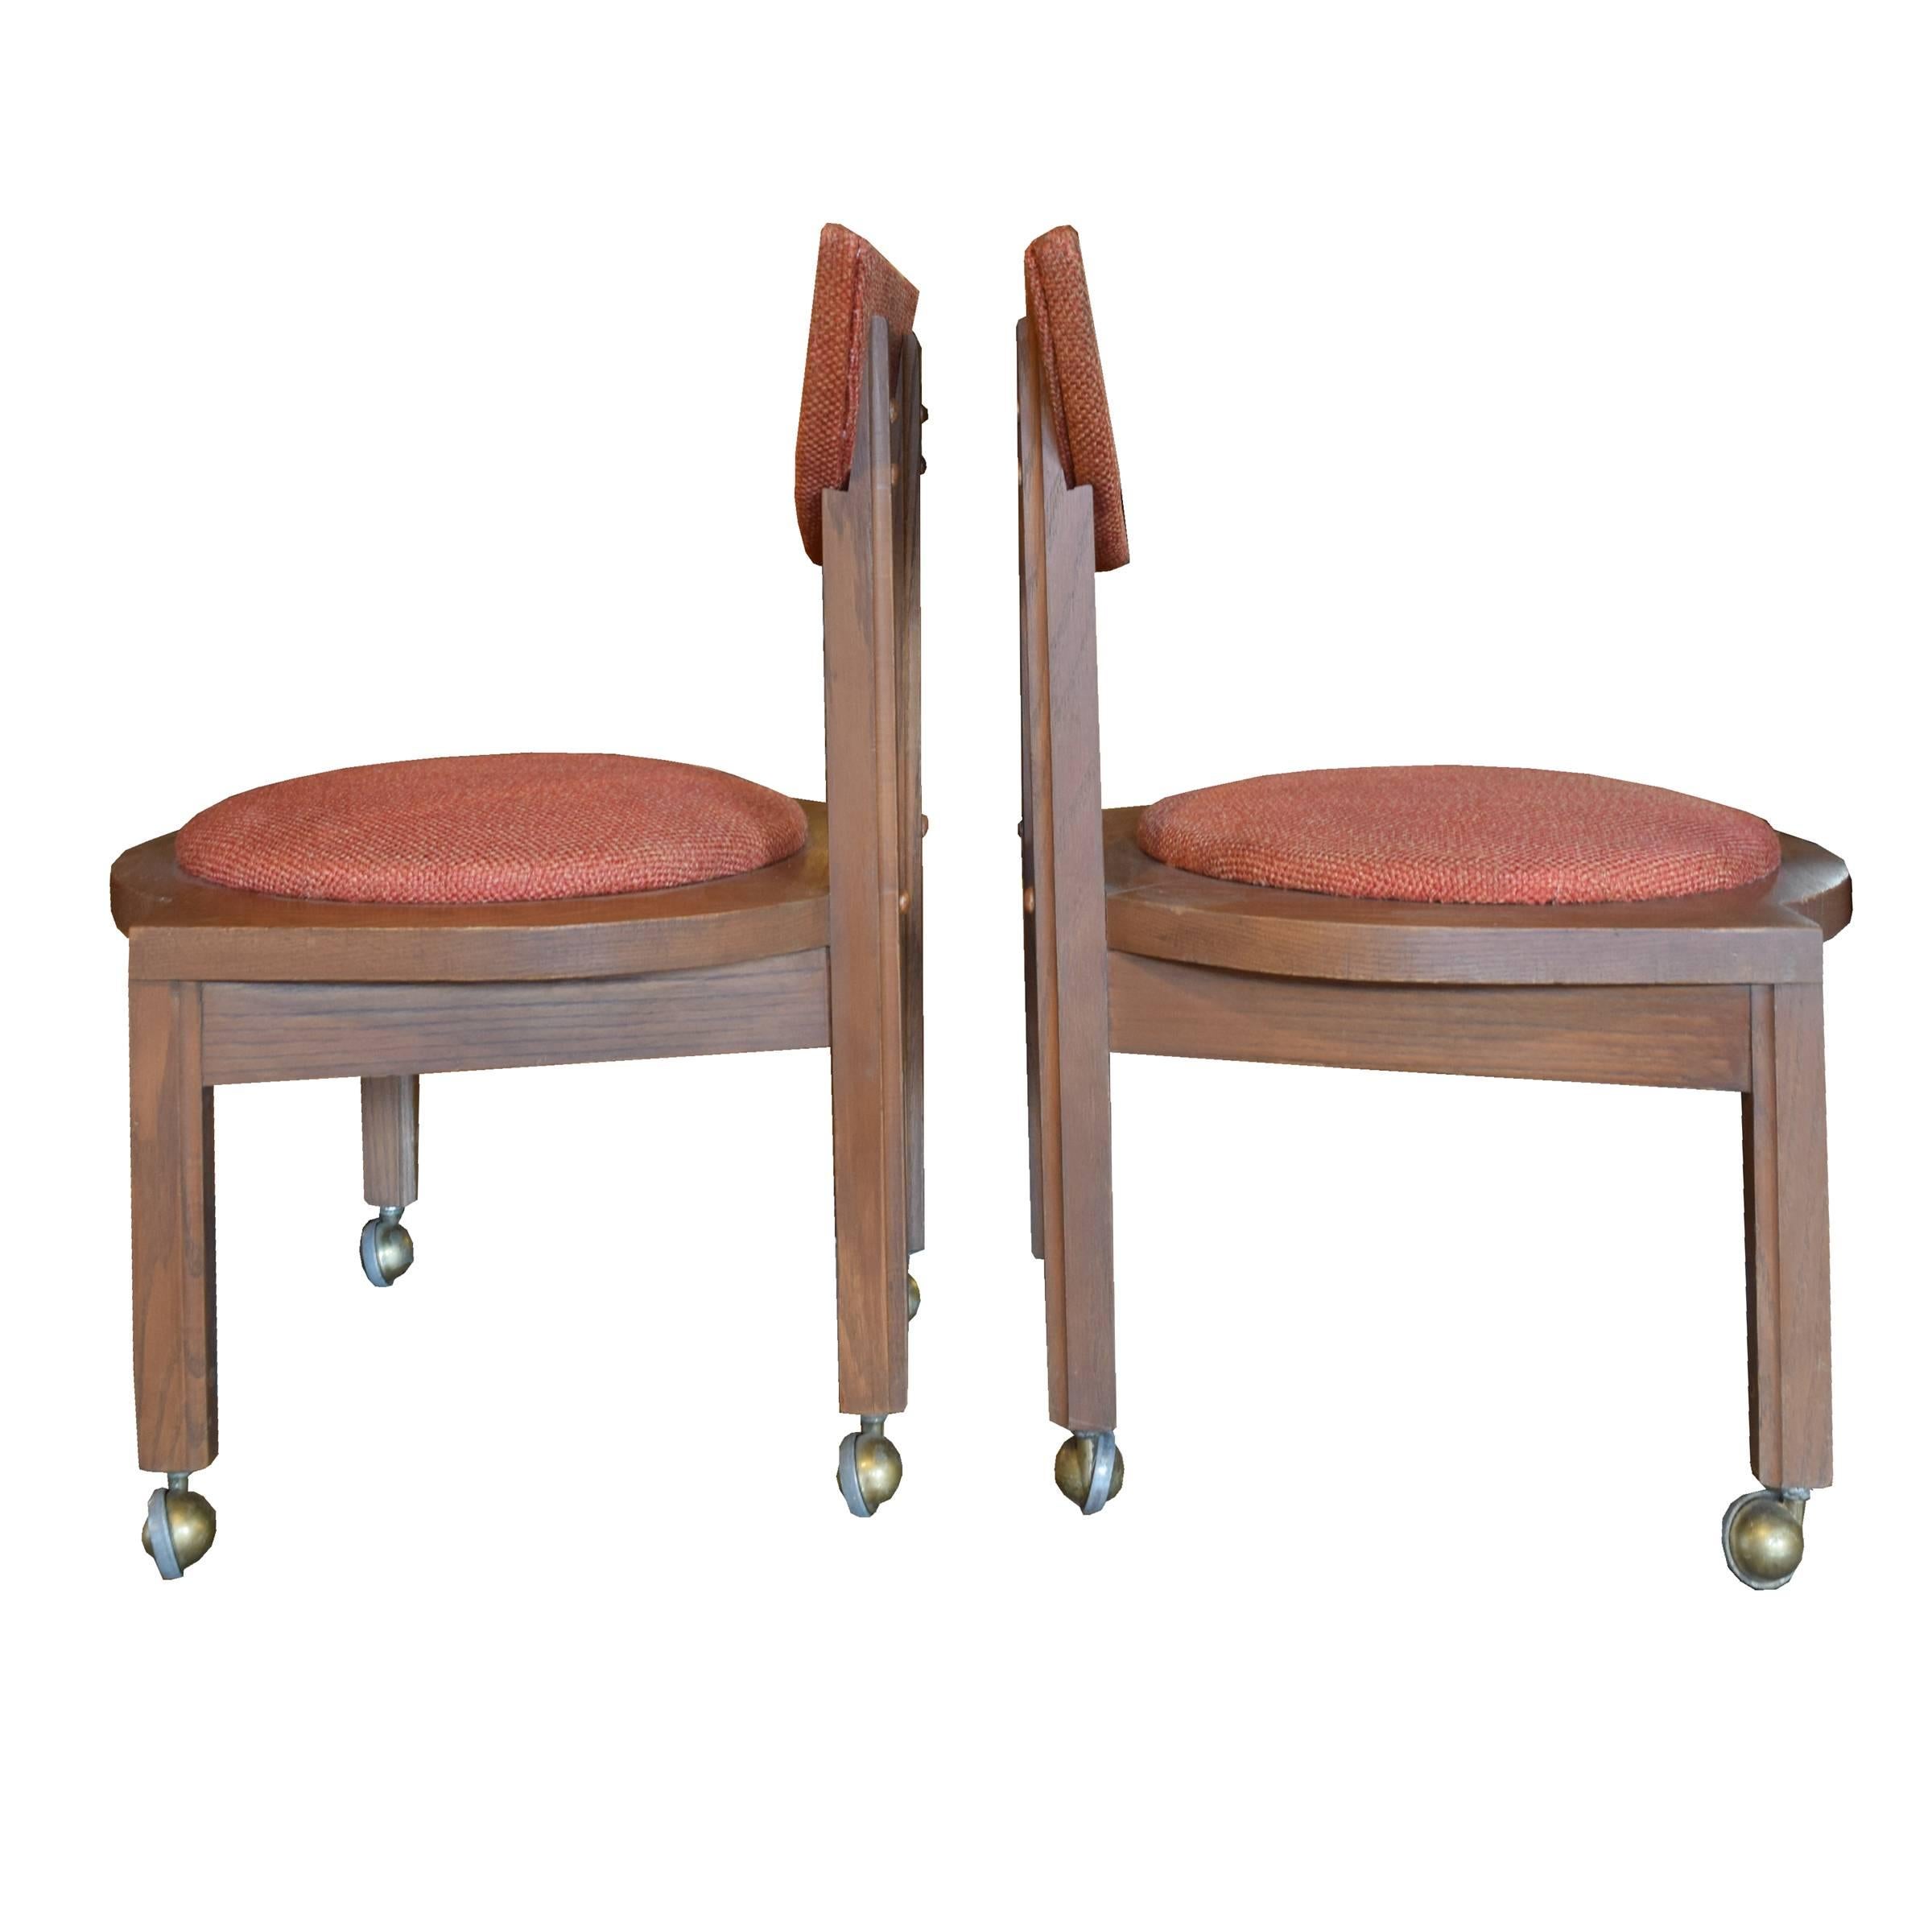 A pair of Frank Lloyd Wright designed side chairs with original upholstery and casters from the Riverview Terrace Restaurant in Spring Green, WI. The restaurant, built in 1953, is across the street from Wright's Wisconsin home and studio, Taliesin,